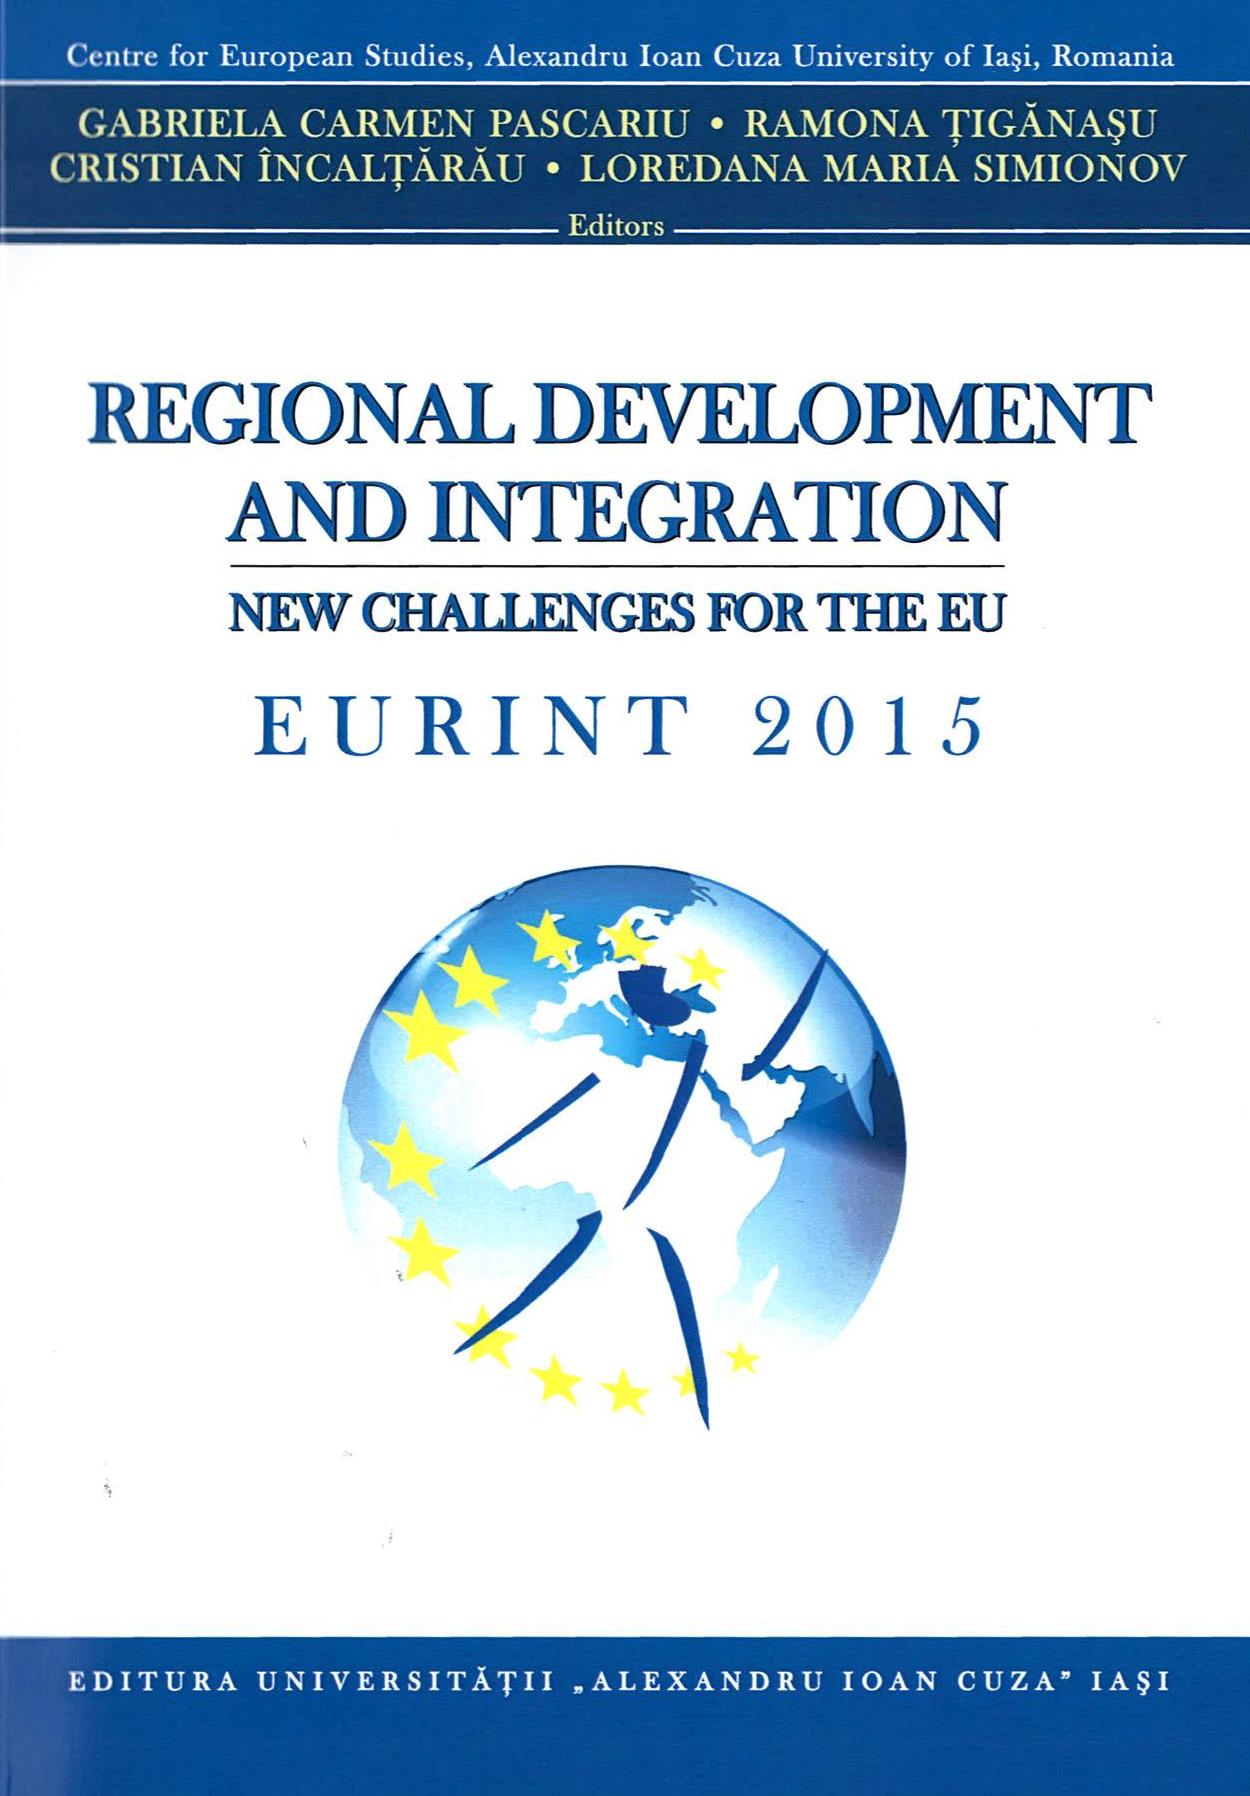 MIGRATION INTEGRATION AS A FACTOR OF ECONOMIC AND REGIONAL DEVELOPMENT IN THE EUROPEAN UNION Cover Image